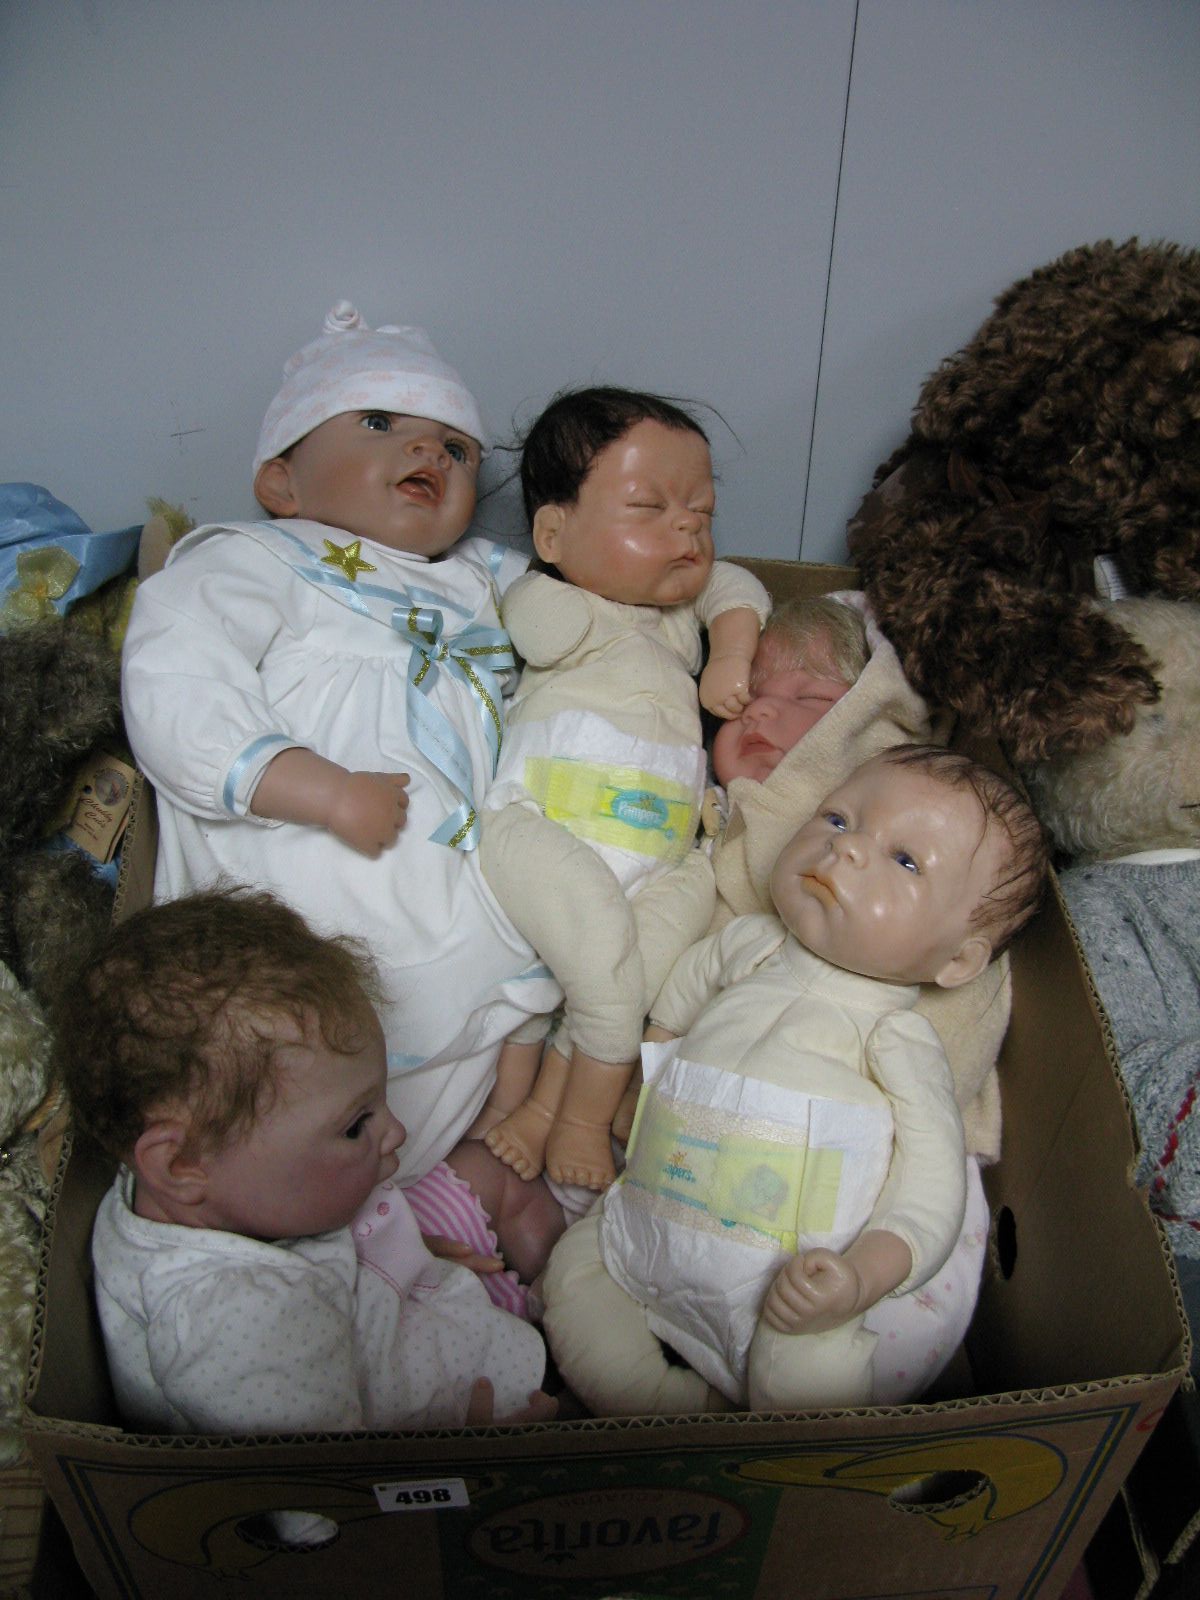 A Reborn Doll, in polka dot jumpsuit, together with two Anna Carter dolls, an Ashton Drake artists